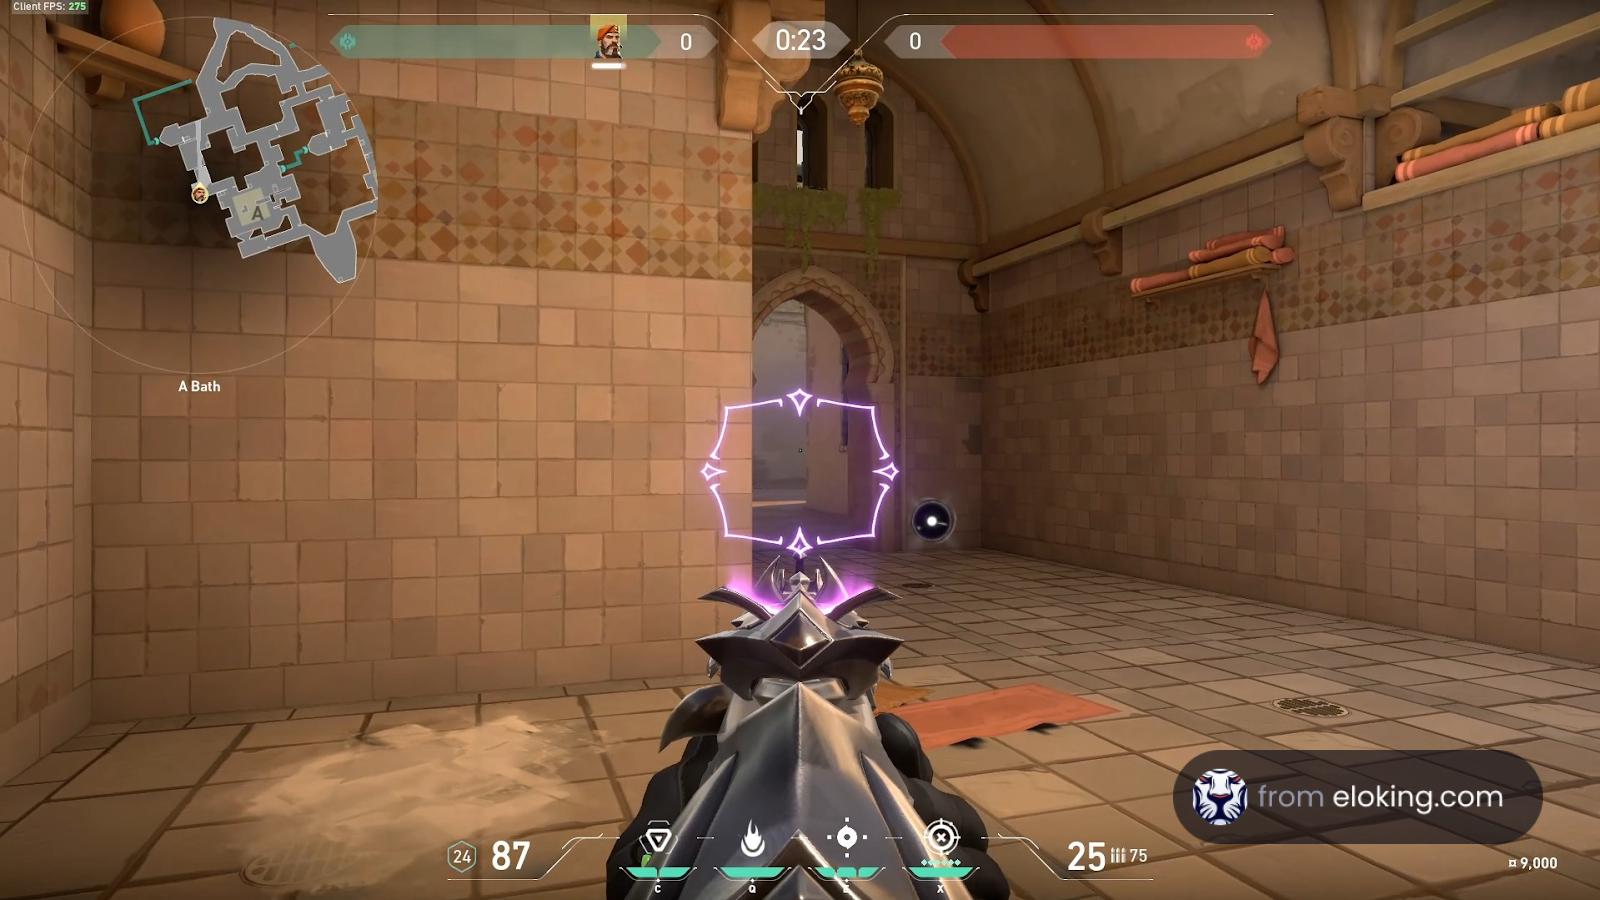 First person view of a gameplay scene in a shooter game